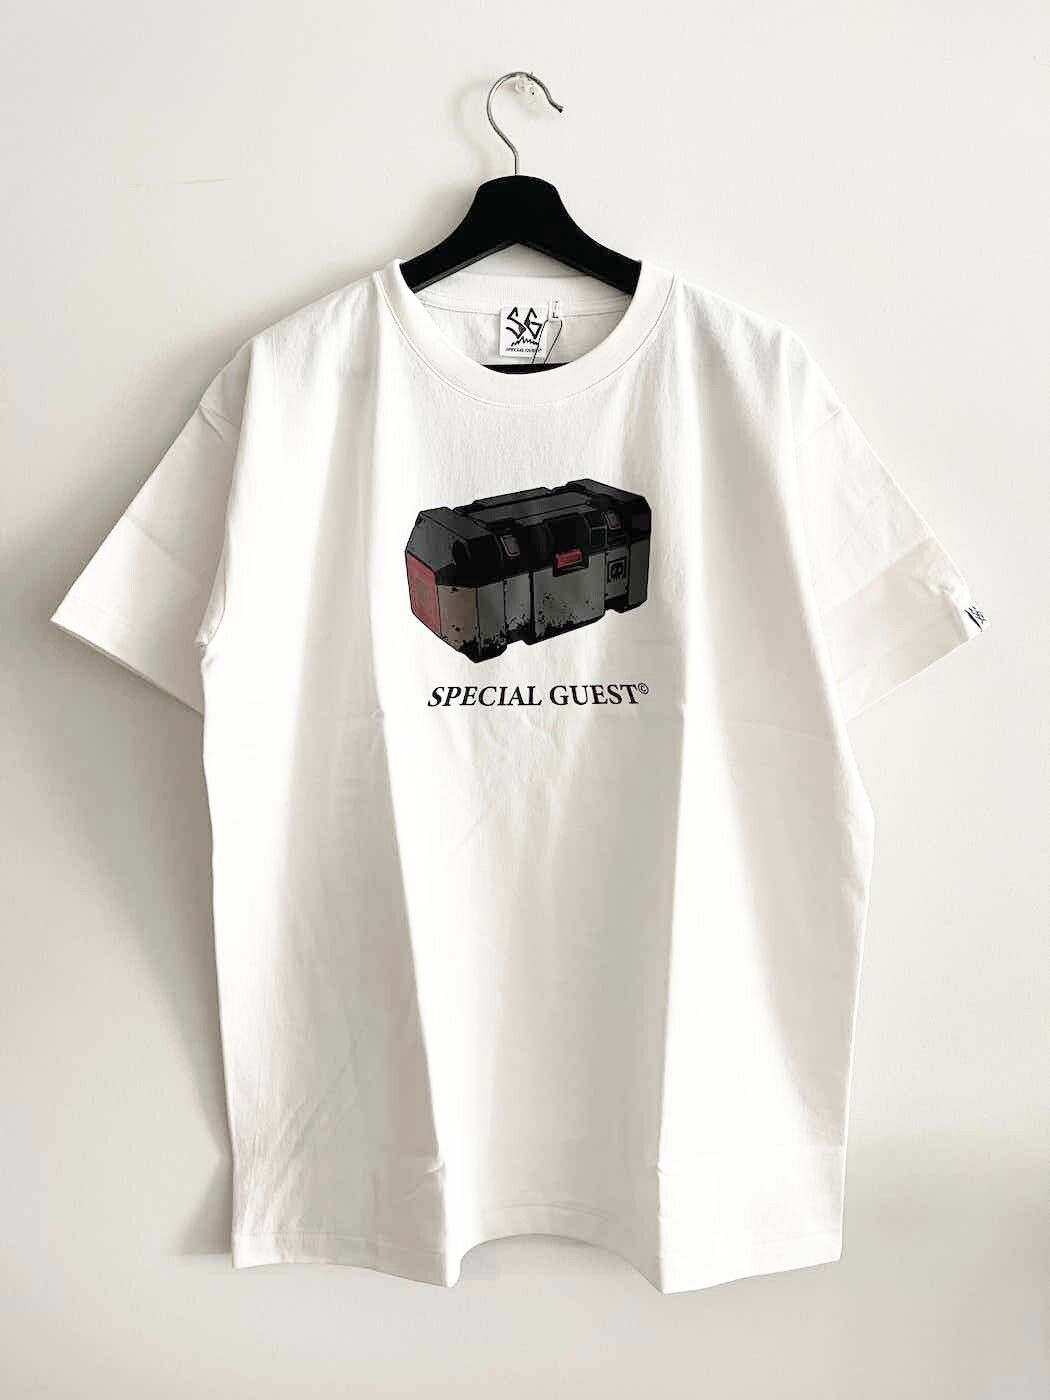 RARE Apex Legends x Beams x Special Guest Japanese Tee - 1